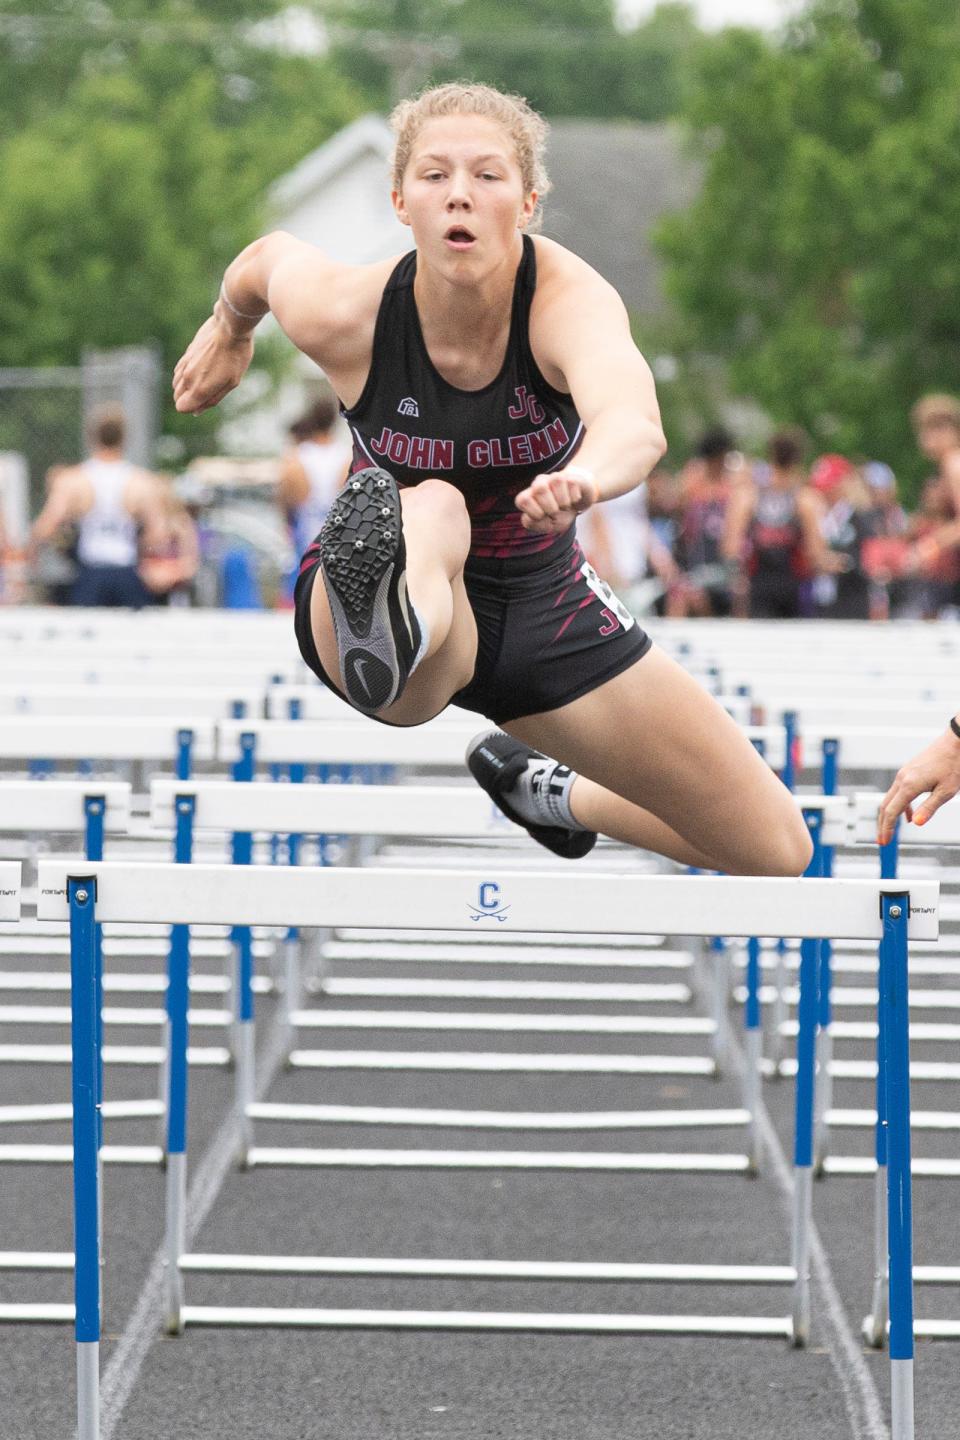 John Glenn’s Kara Fields took second place in the girls 100-meter hurdles with a time of 15.43 at the Division II regional track meet held at Chillicothe High School’s Obadiah Harris & Family Athletic Complex on Saturday, May 28, 2022, in Chillicothe, Ohio.